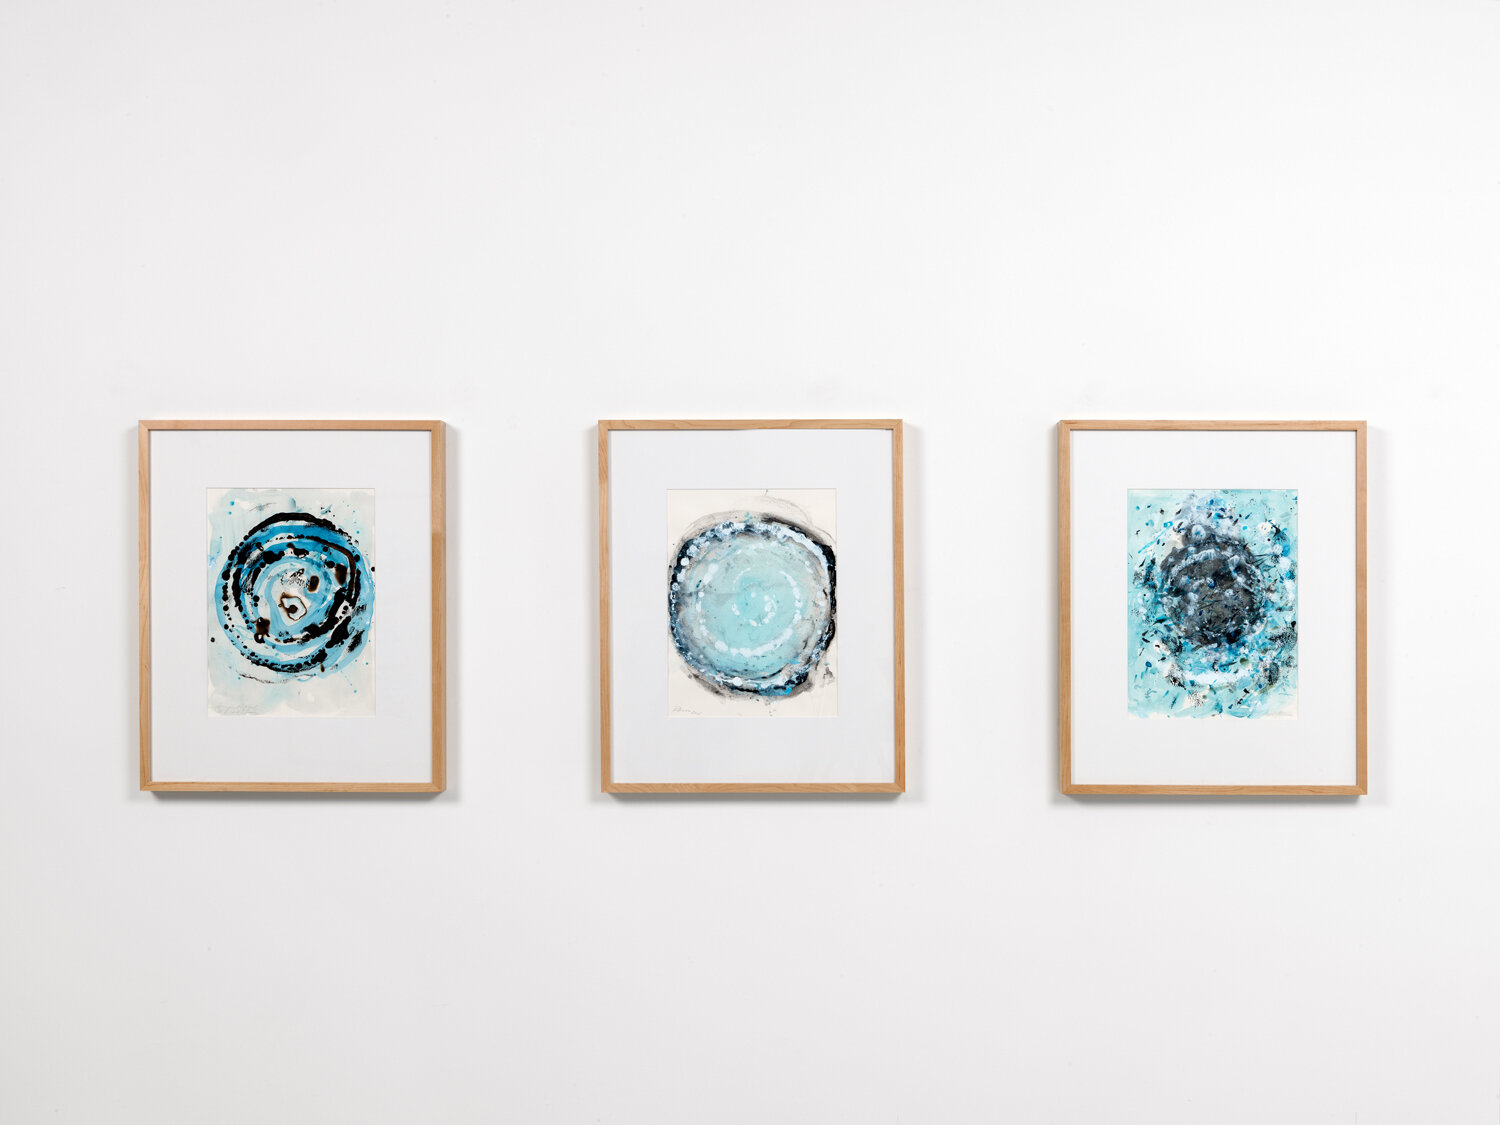 Augen Wirbel, 2015, pencil and acrylic on paper, 40 x 30 cm each, framed 64 x 52 cm